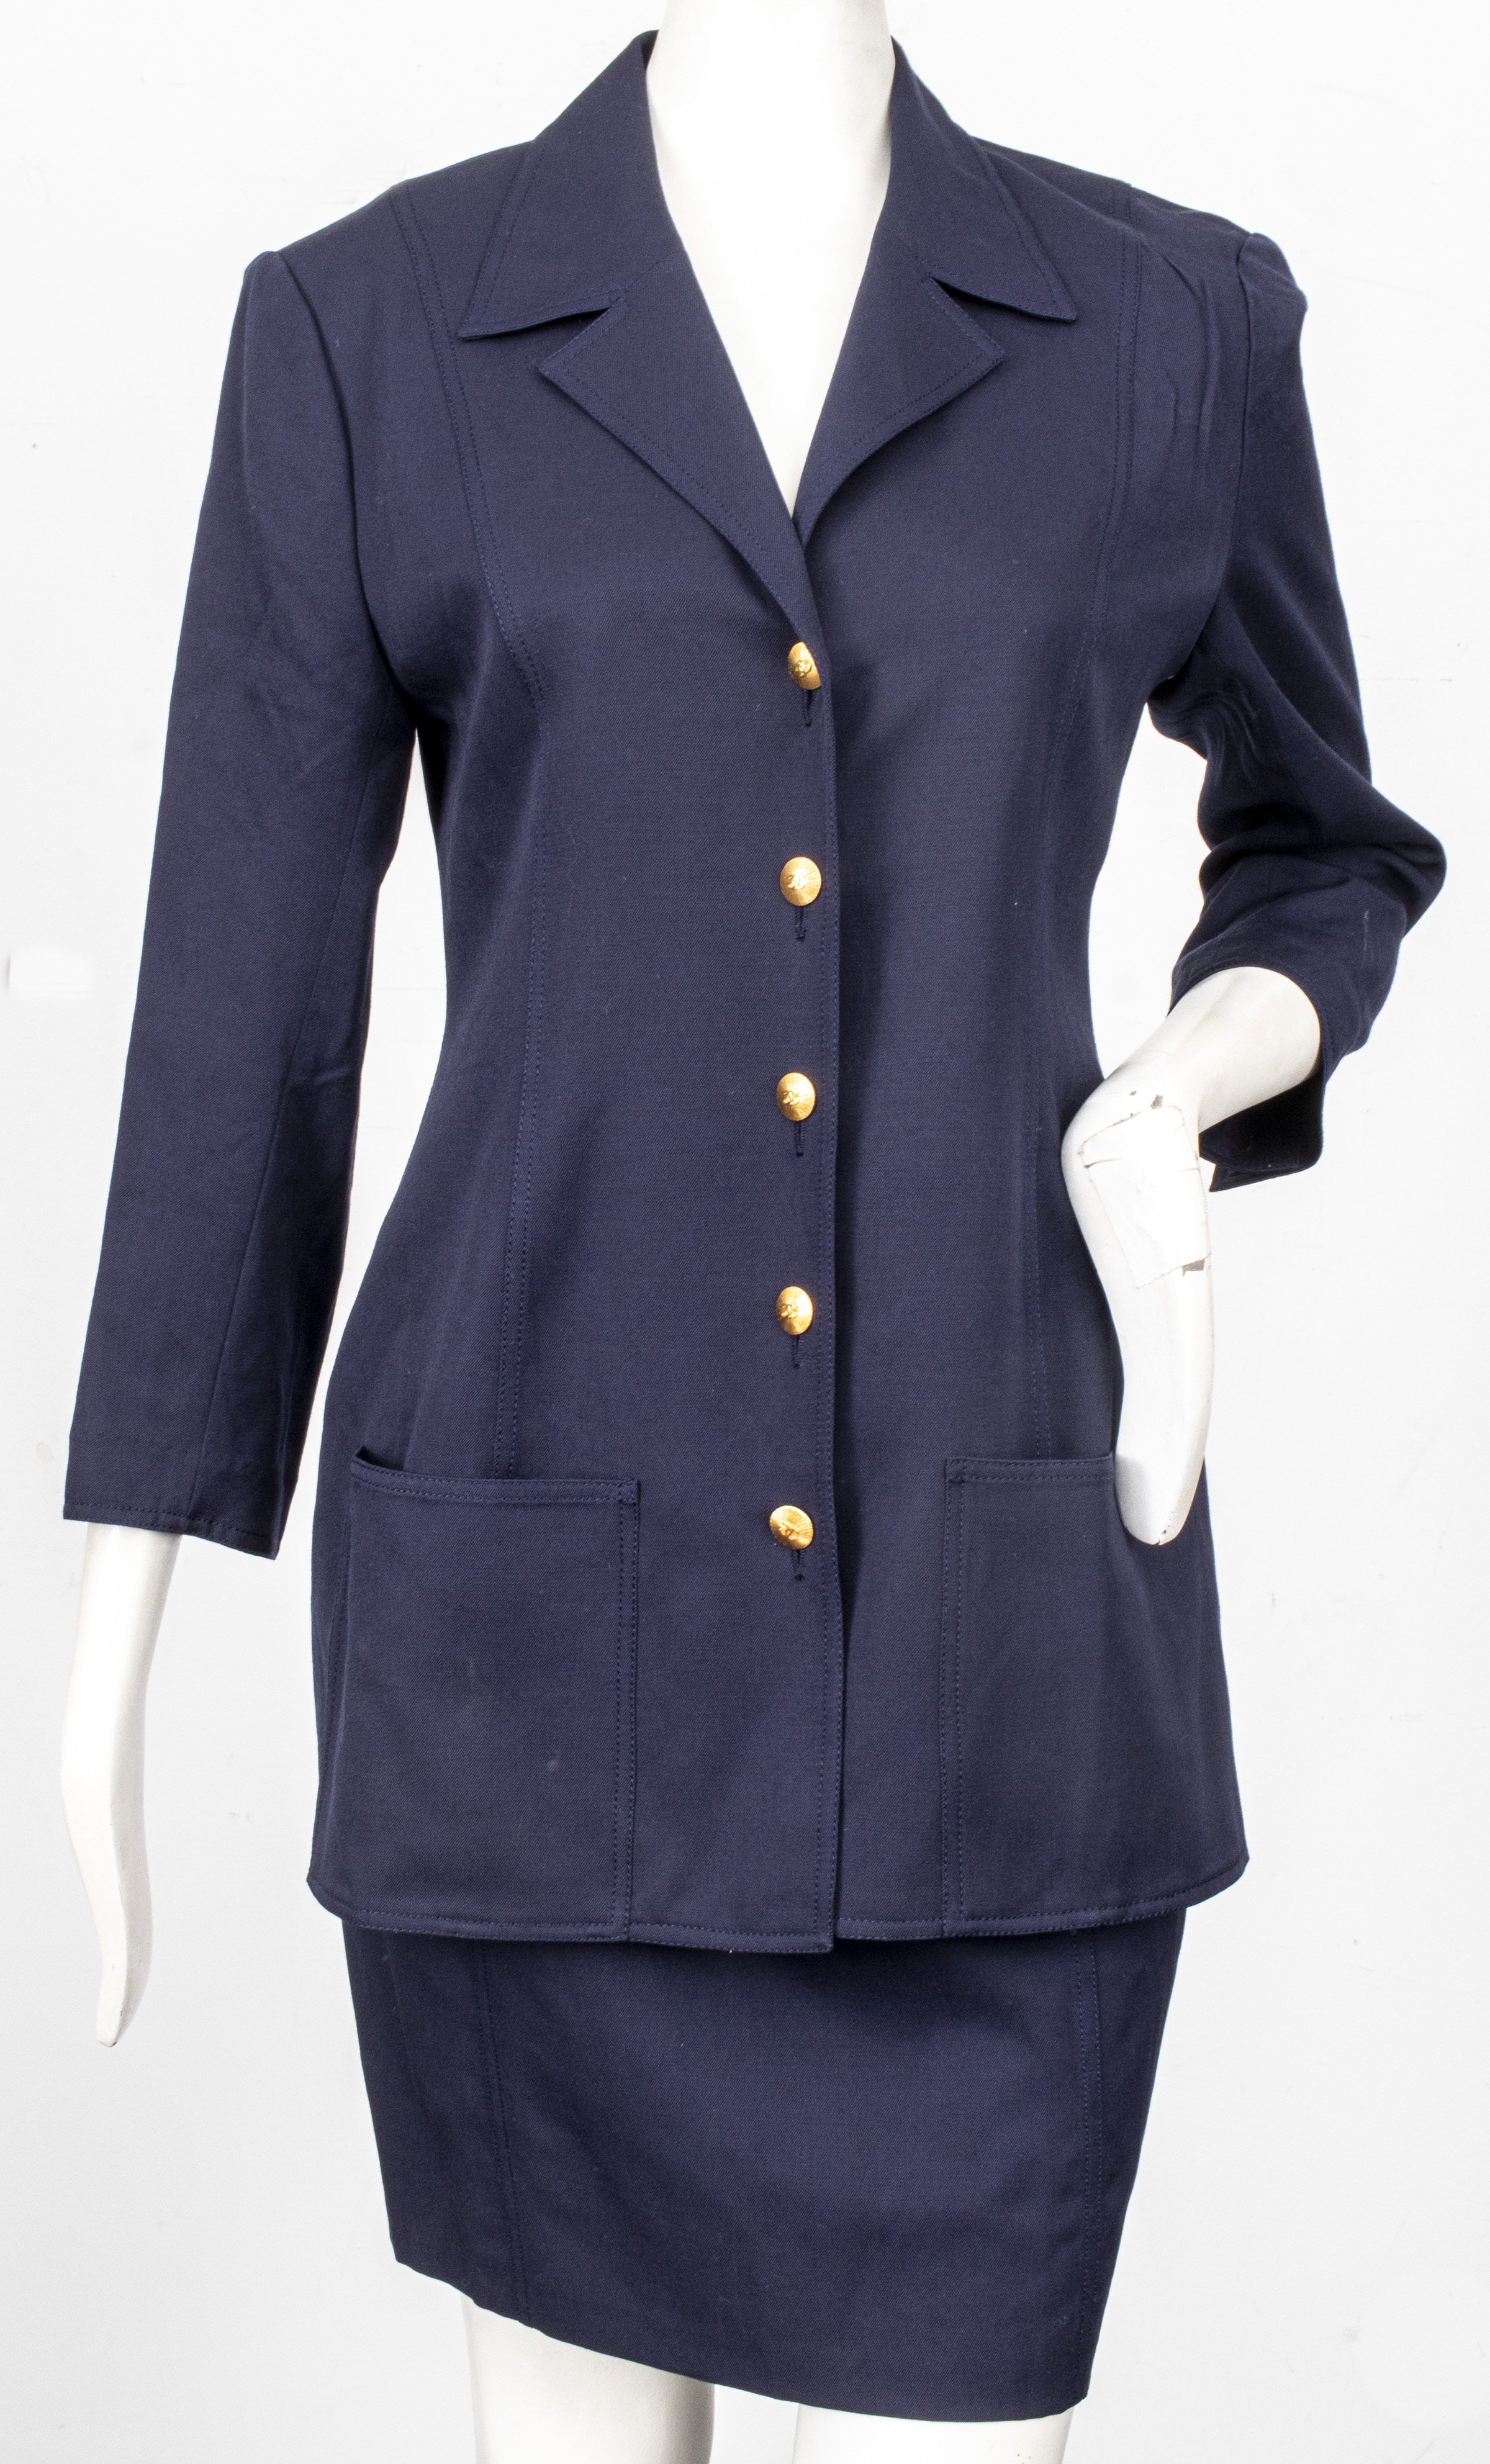 CHANEL NAVY BLUE SKIRT SUIT Chanel 3c4bf9